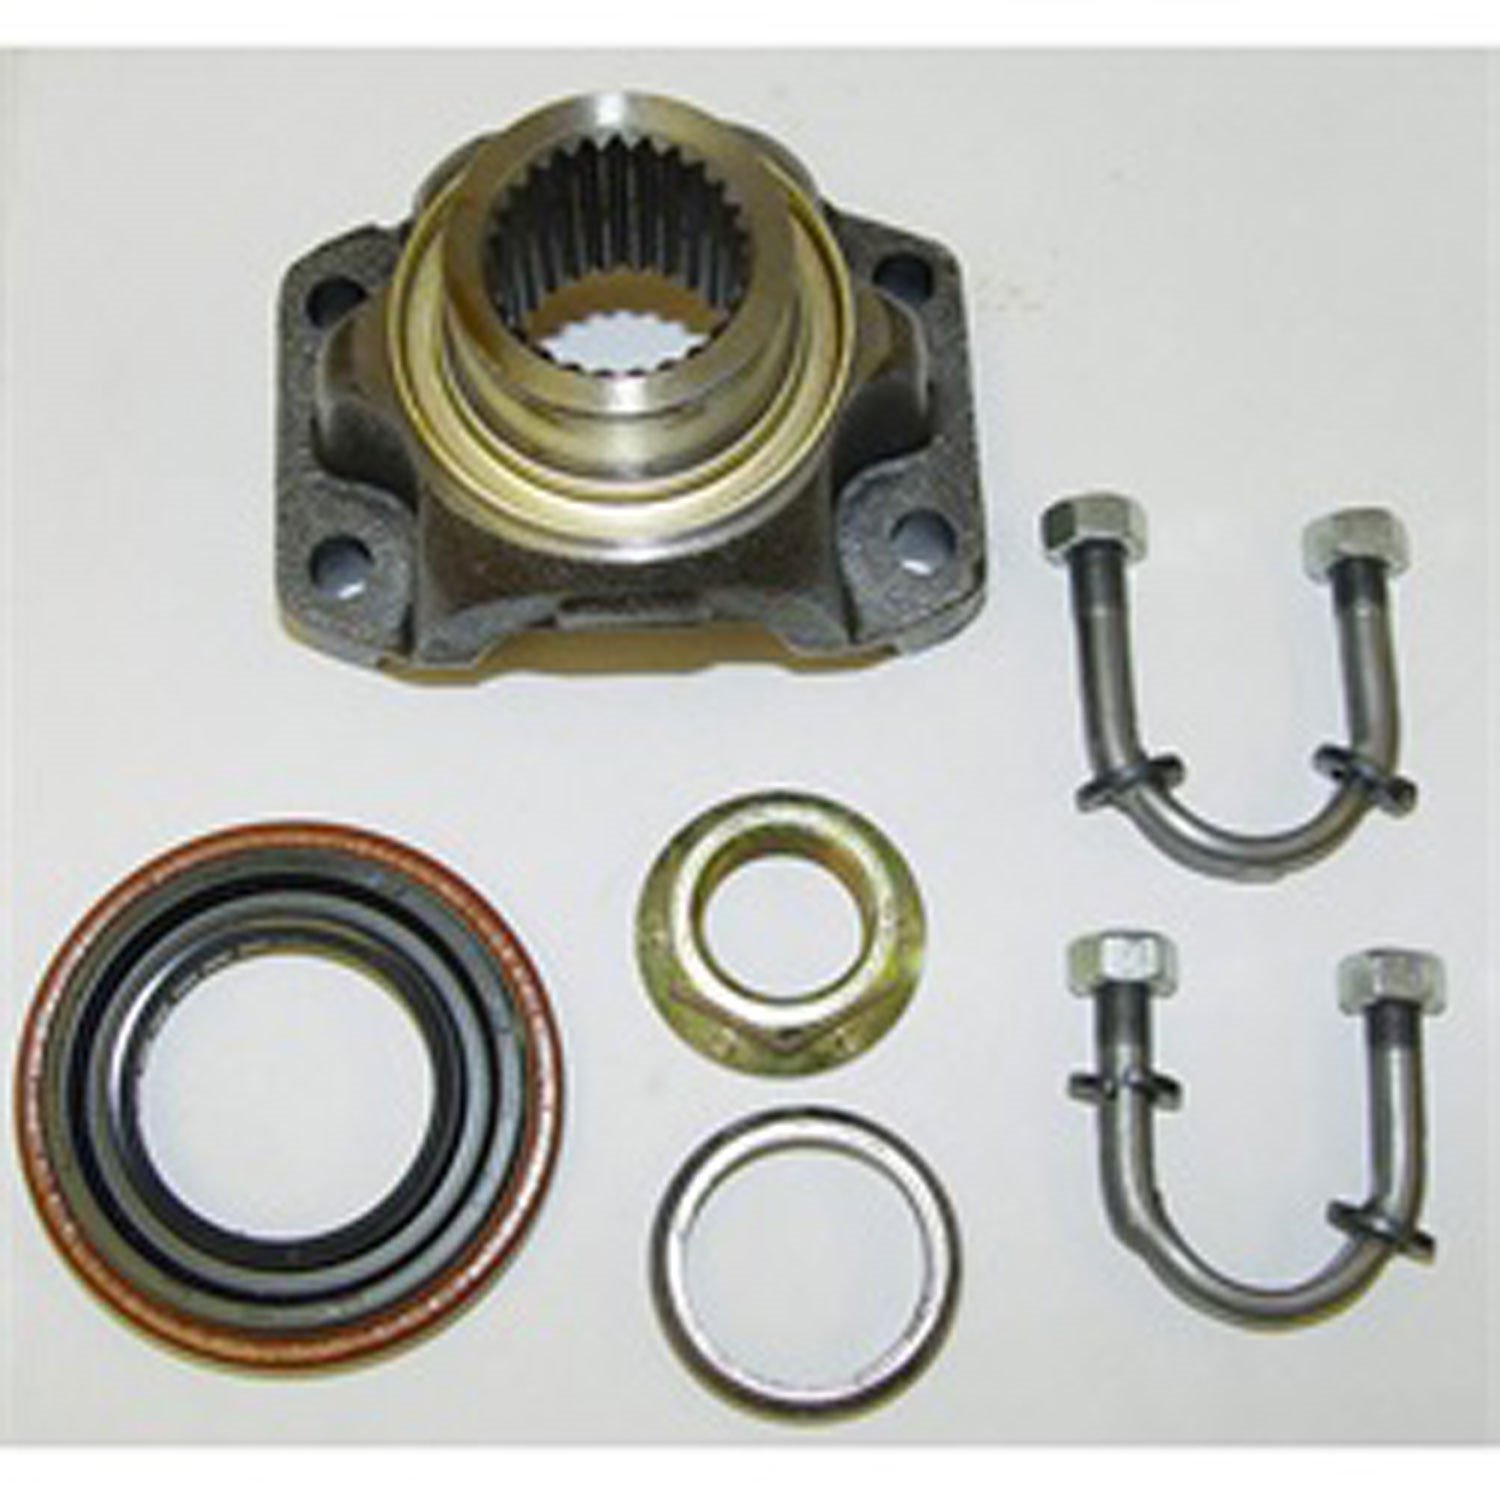 This Dana 35 yoke kit from Omix-ADA fits 93-95 Jeep Wranglers and 96-01 Cherokees with a 1330 series U-joint.